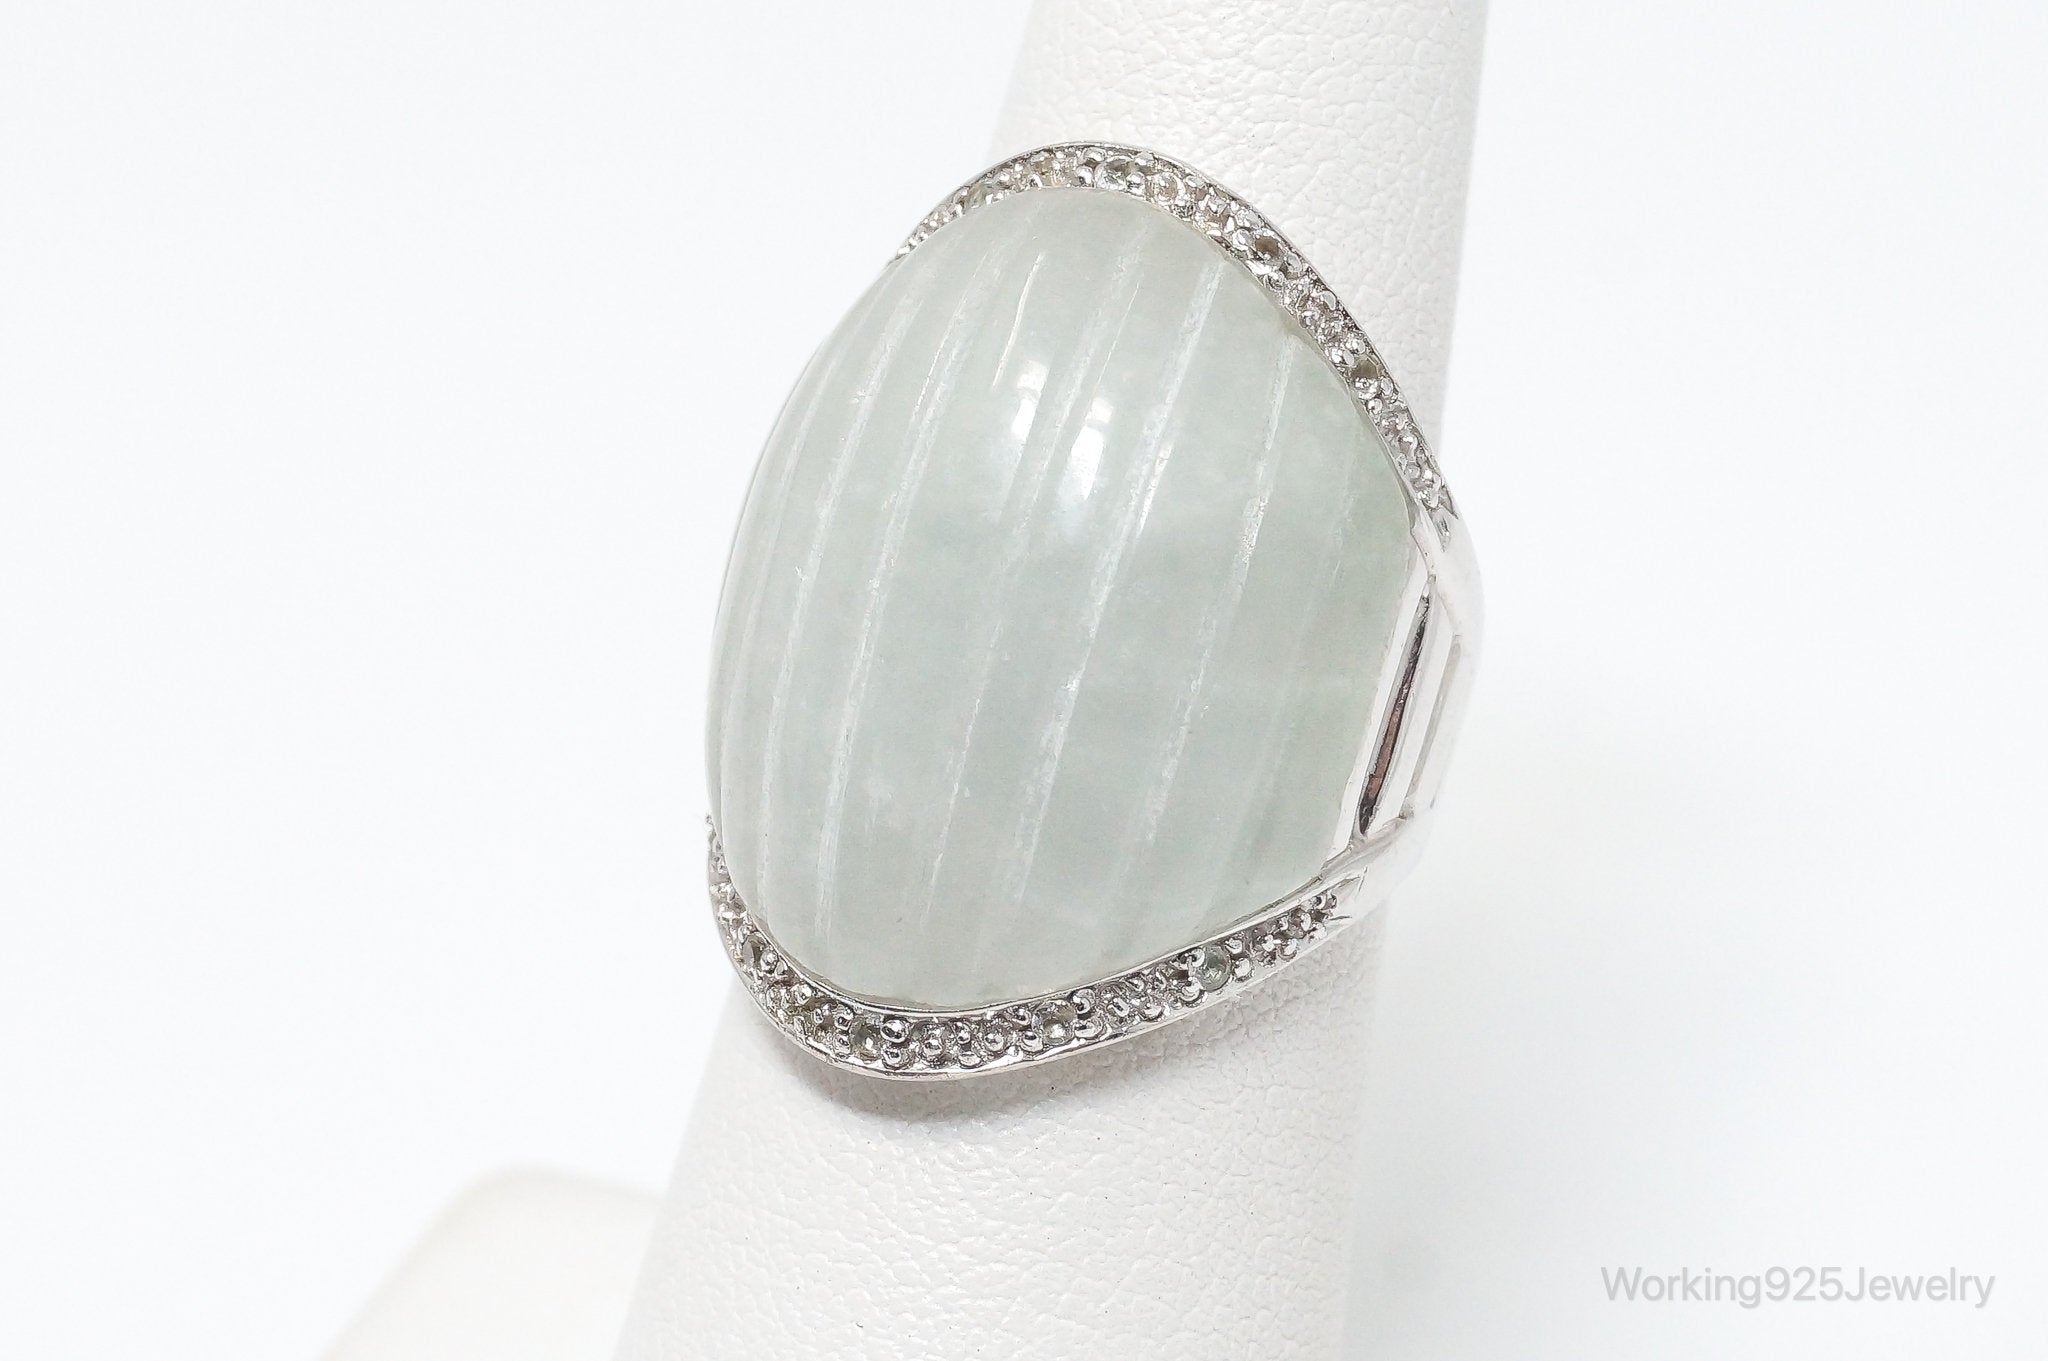 Vintage White Jade Cubic Zirconia Sterling Silver Ring - Size 5.75